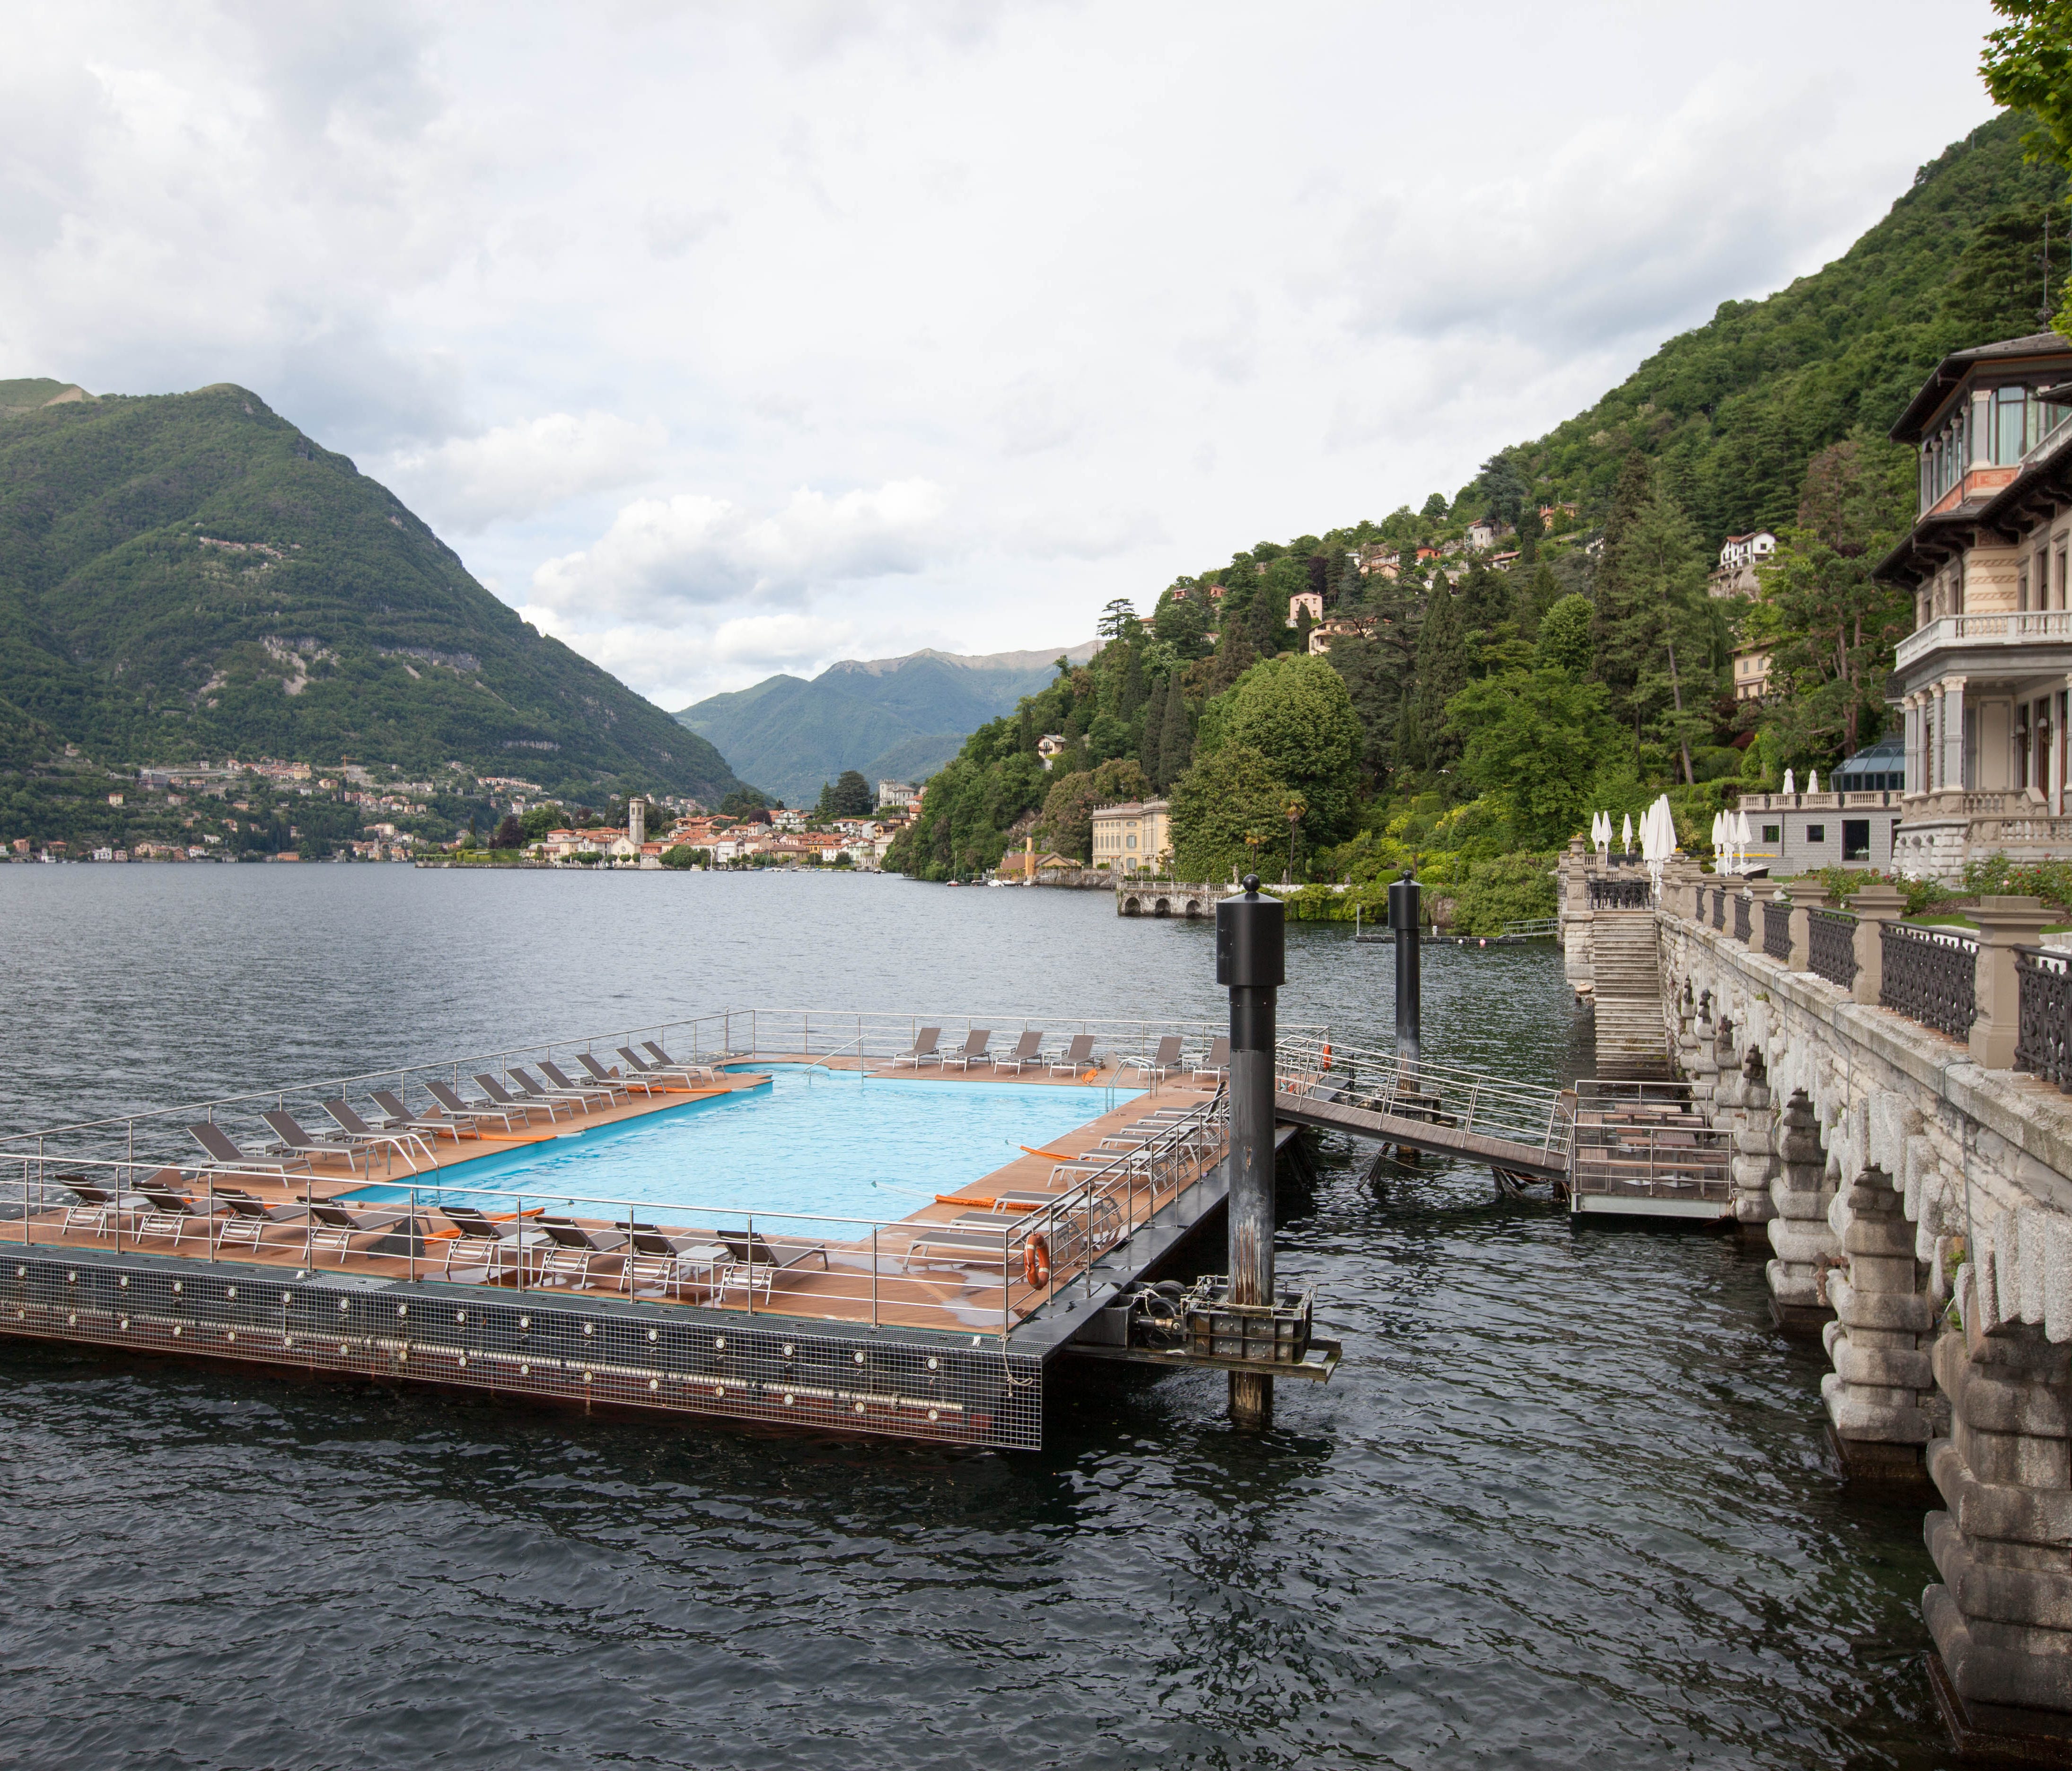 Casta Diva Resort & Spa, Lake Como, Italy: Why choose between whiling away the day at the pool or the lake when you can do both at Casta Diva Resort & Spa? Located on the shores of Lake Como, in the town of Blevio, this romantic retreat stars a float